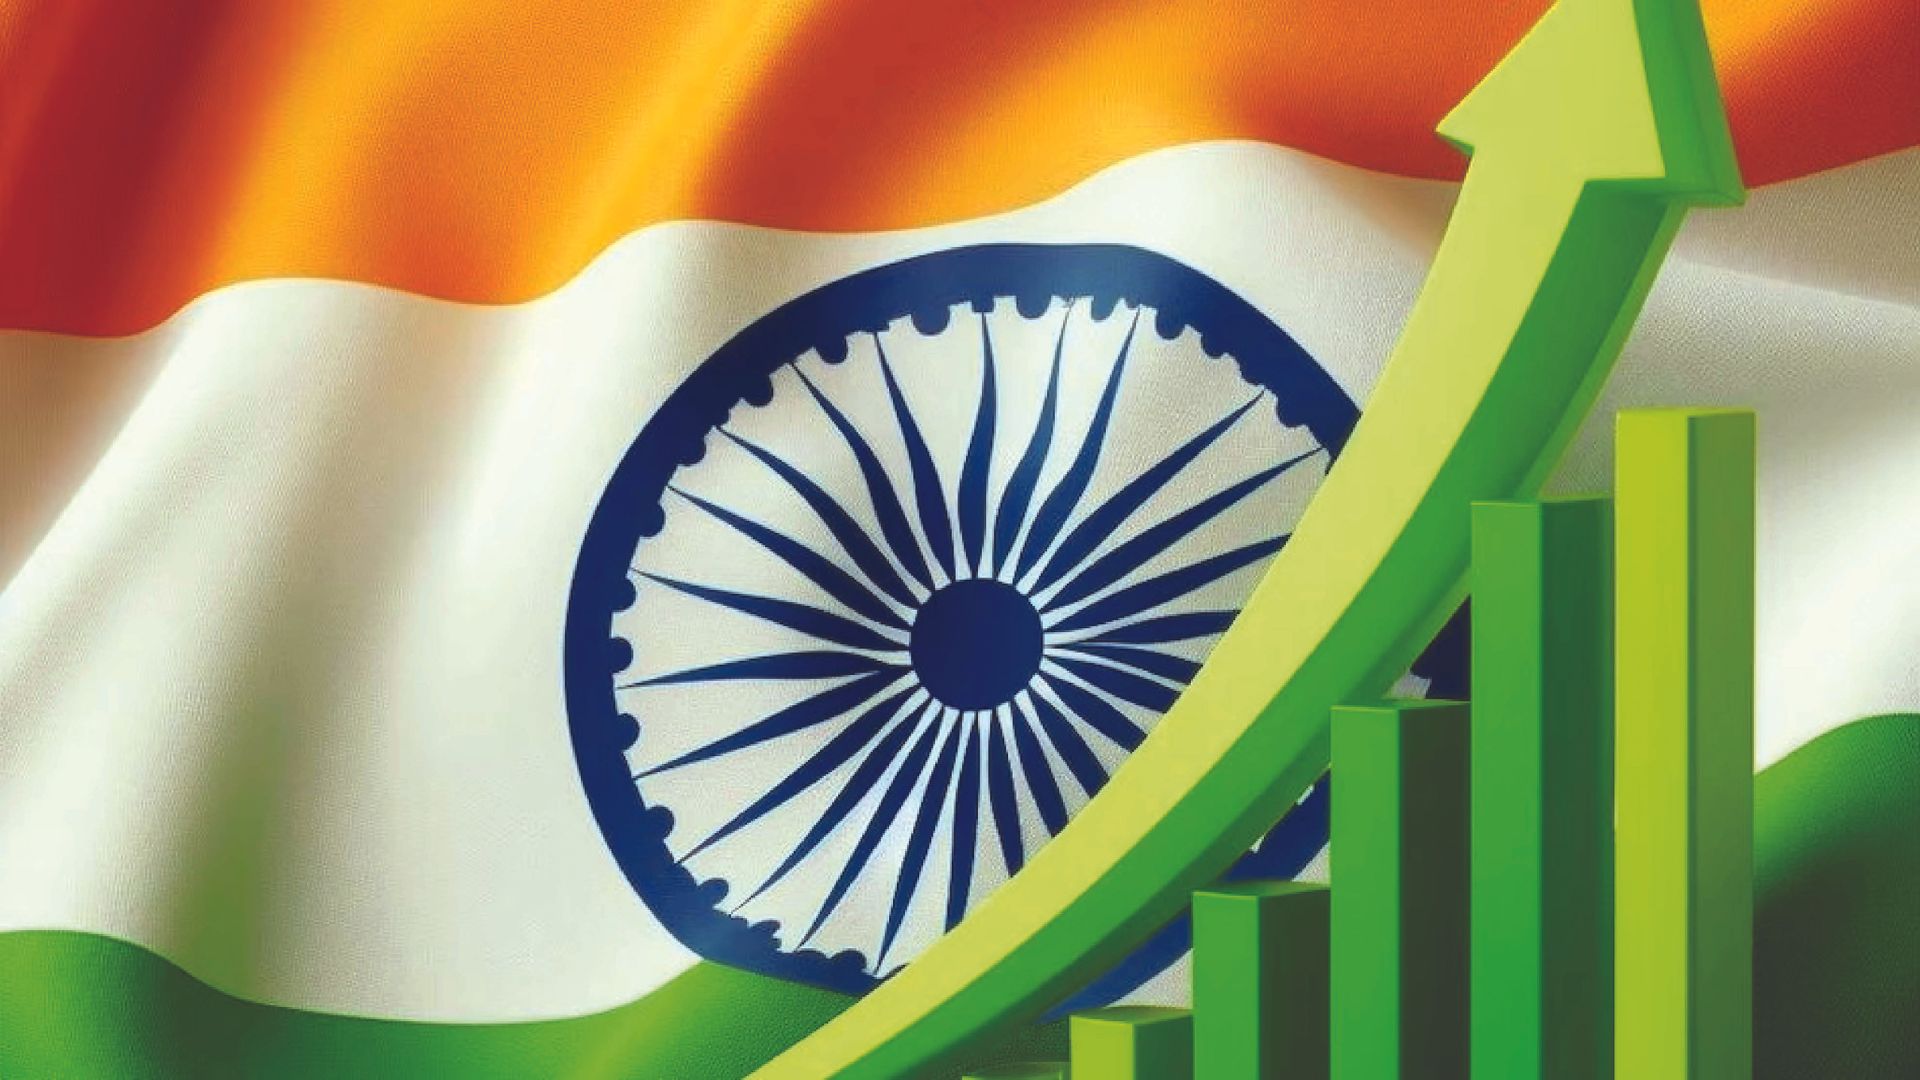 India today ranks first in the world in the field of real time digital transactions. In the year 2021, 48 billion digital transactions took place in the country, which is a world record in itself. India is the world’s largest generic medicine producer and 60000 generic drugs in 60 categories are manufactured in the country. India is today the world’s largest vaccine supplier.